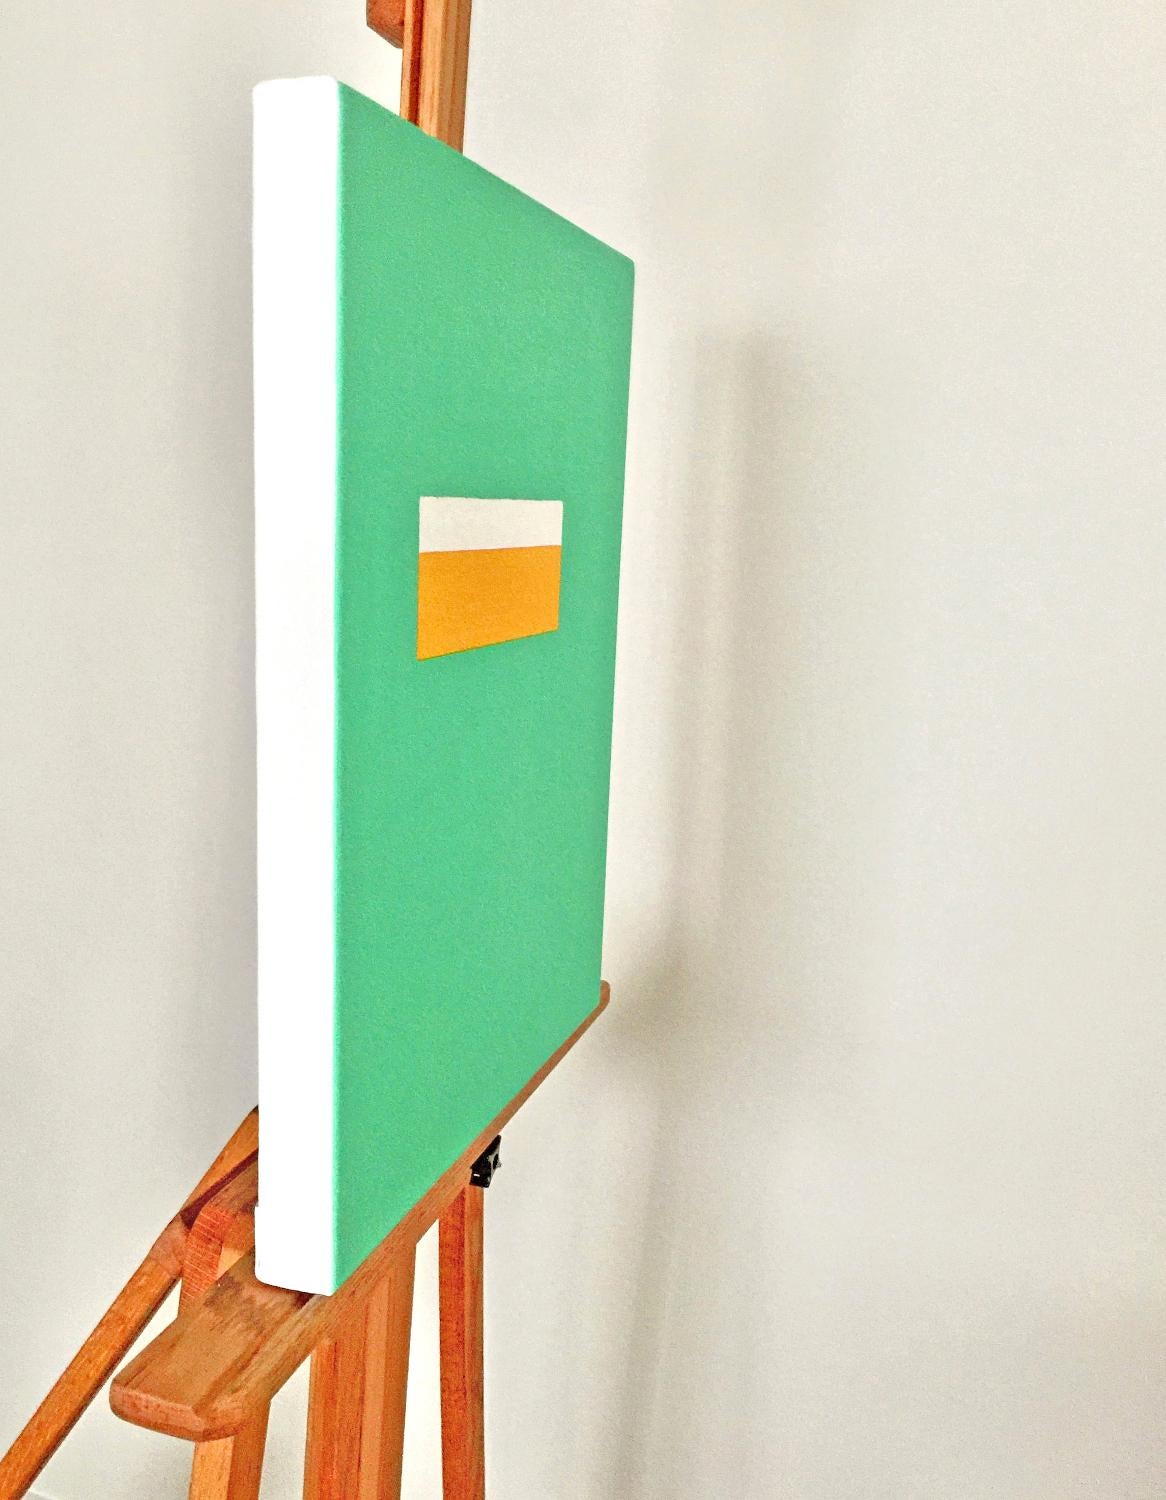 <p>Artist Comments<br>This abstract painting features simple geometric forms and solid colors to create a bold statement. It depicts a horizontal rectangle symbolizing rational discretion against a green background. For artist Shyun Song, the